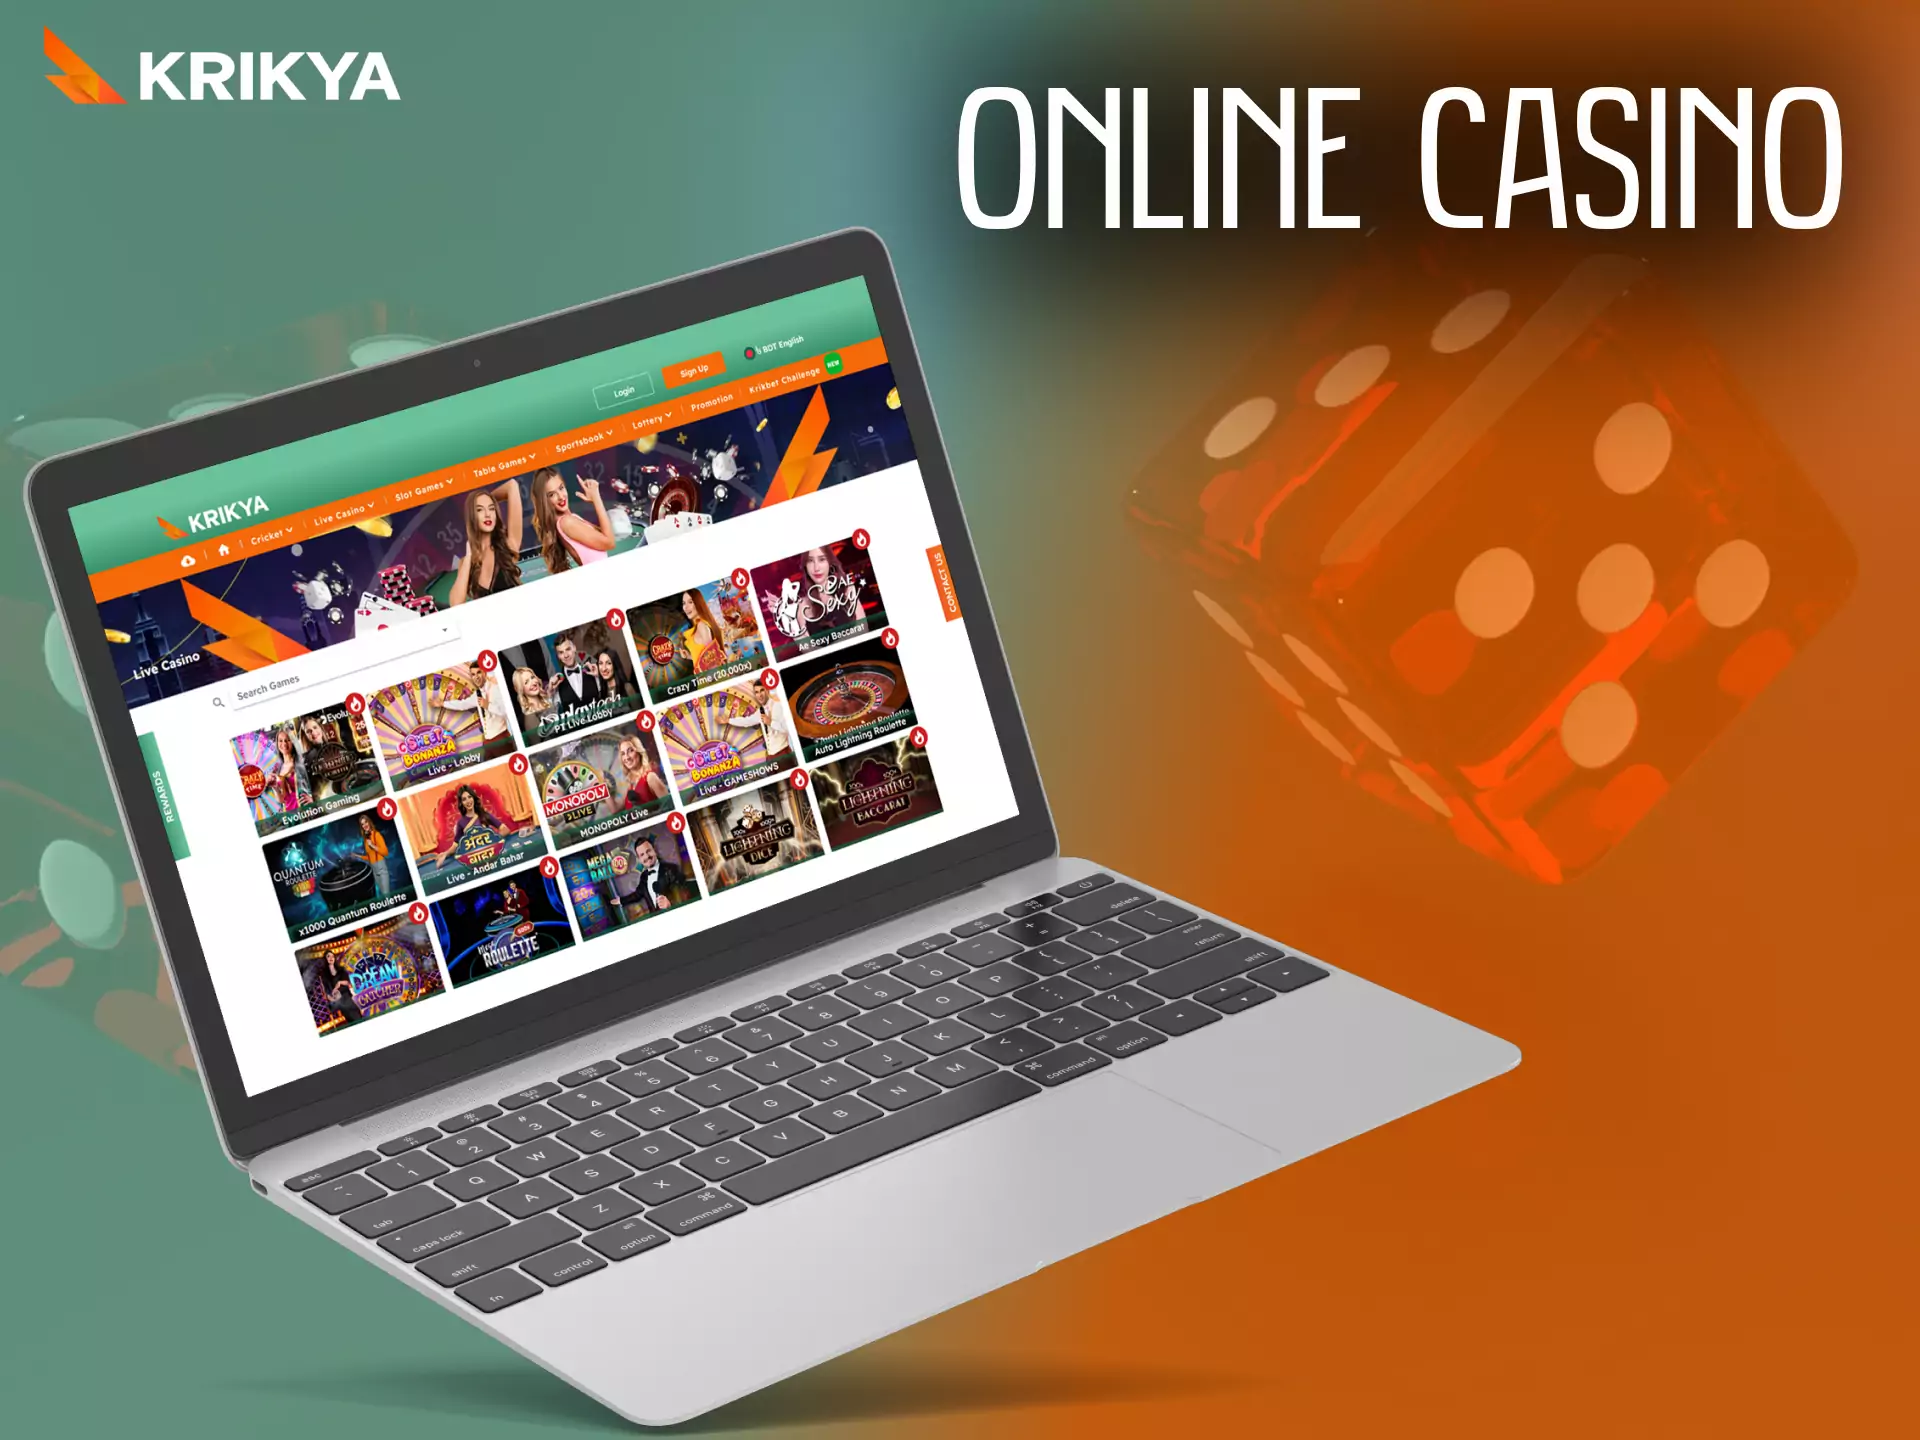 Krikya offers its users to play at online casino.